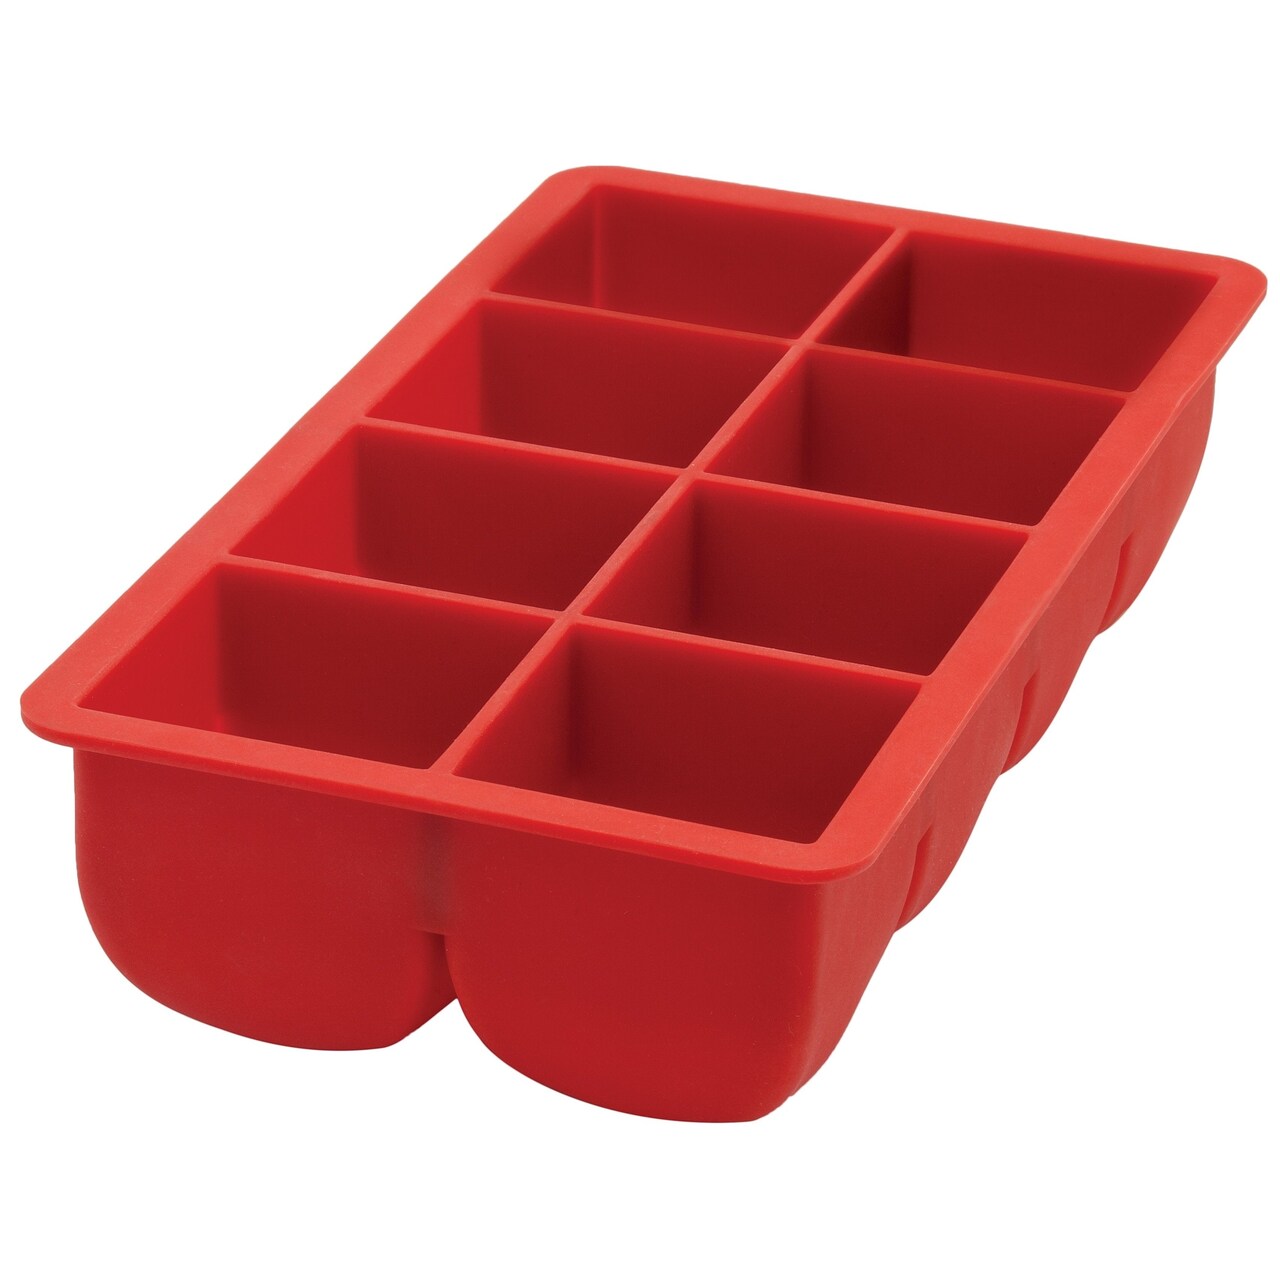 HIC Red Silicone Big Block Ice Cube Tray and Baking Mold - Makes 8  Oversized Cubes